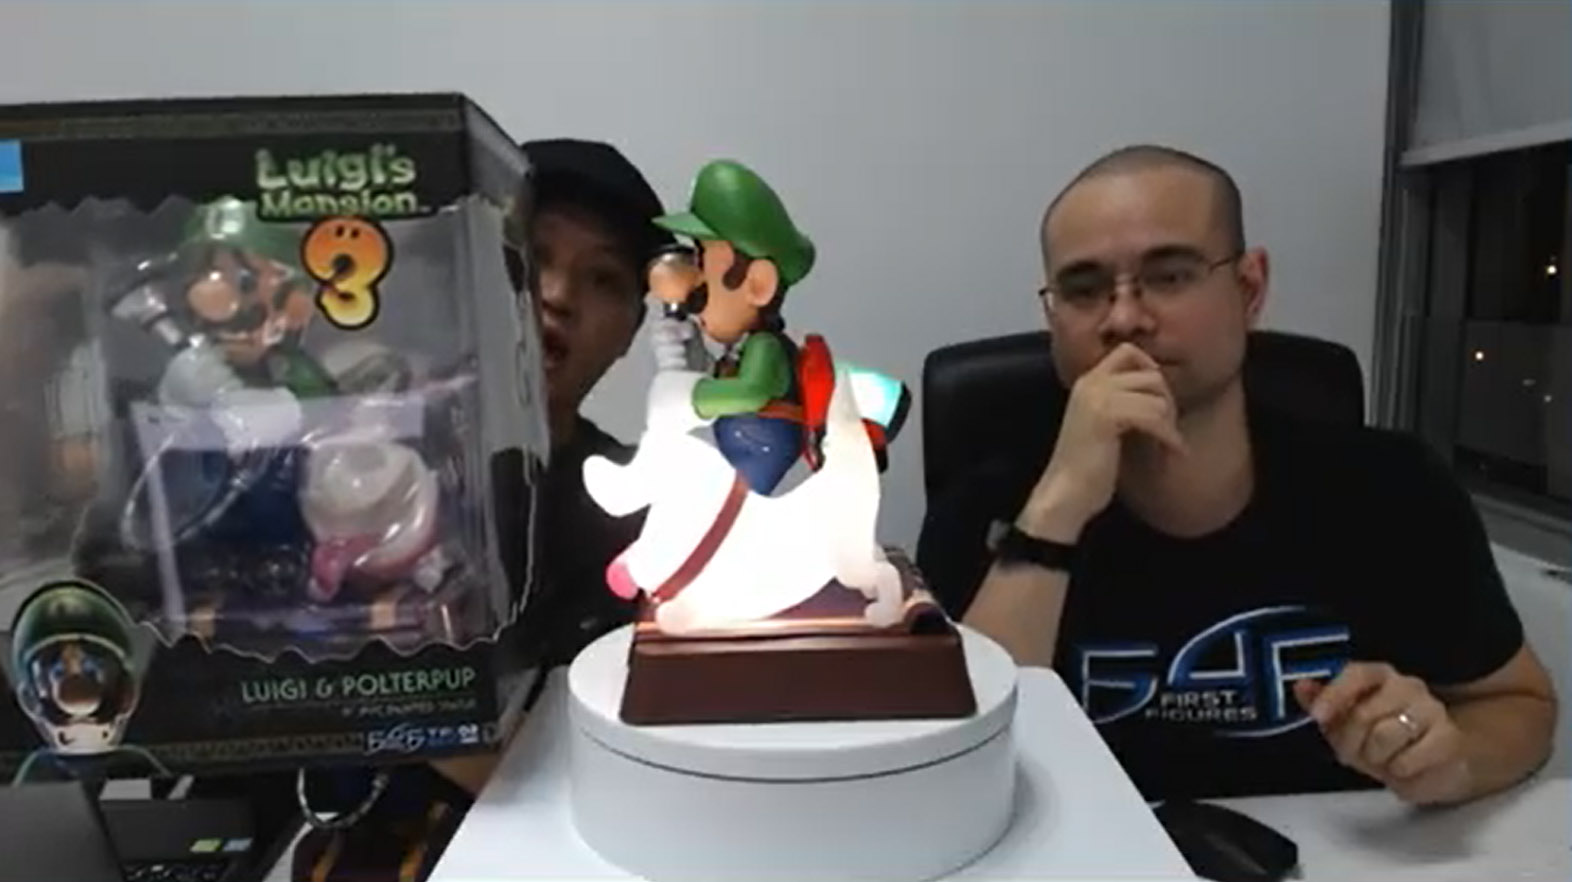 Limited Edition, Luigi and Polterpup Collector's Edition Collectibles